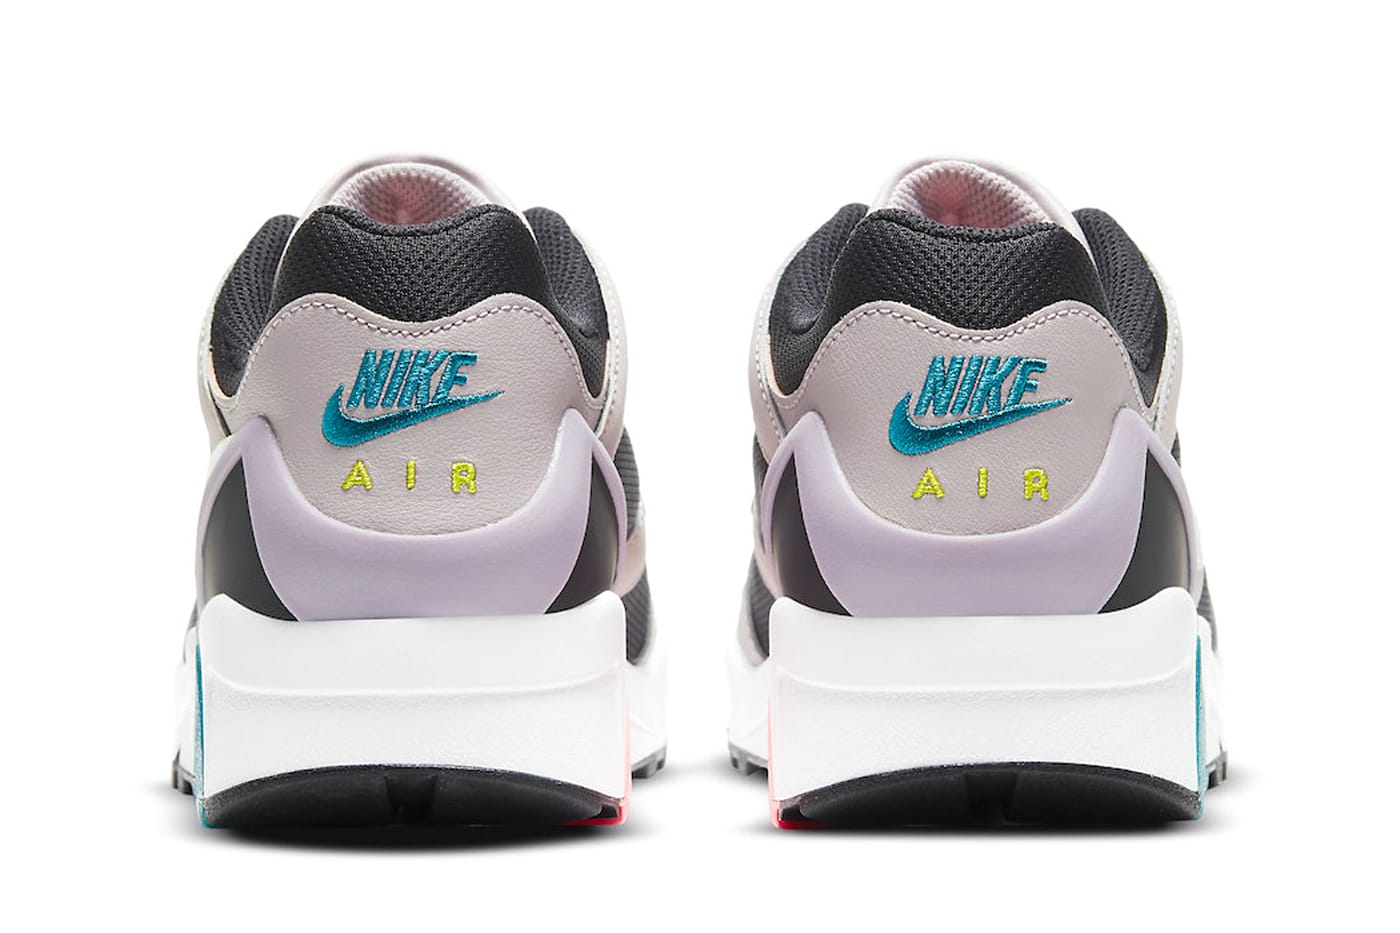 Nike Air Structure Triax 91 New Retro Colorway | HYPEBEAST